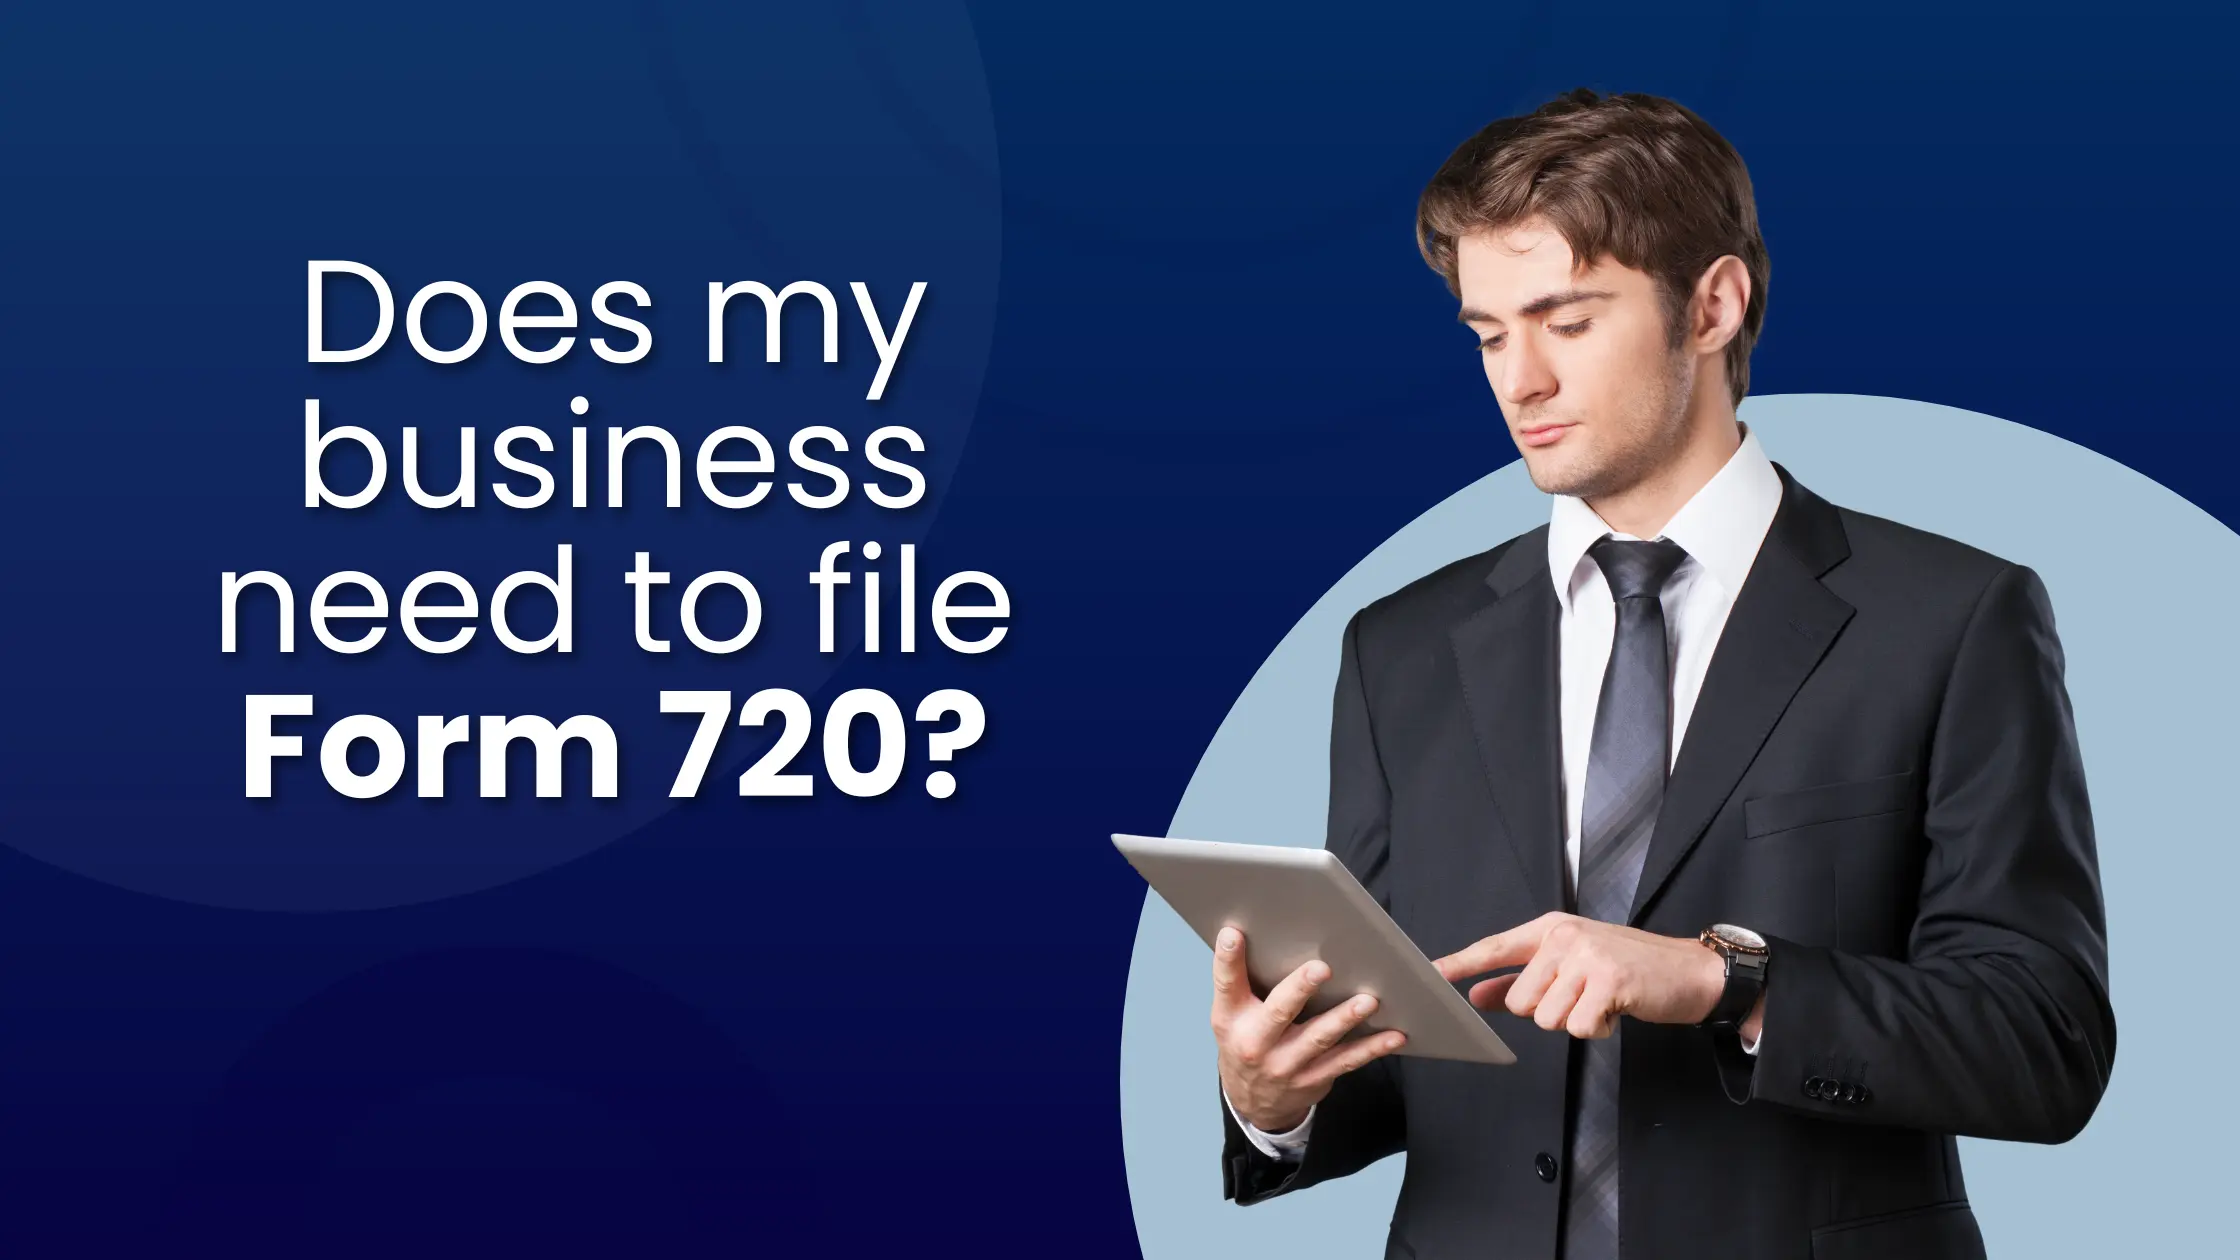 Does my business need to file Form 720?